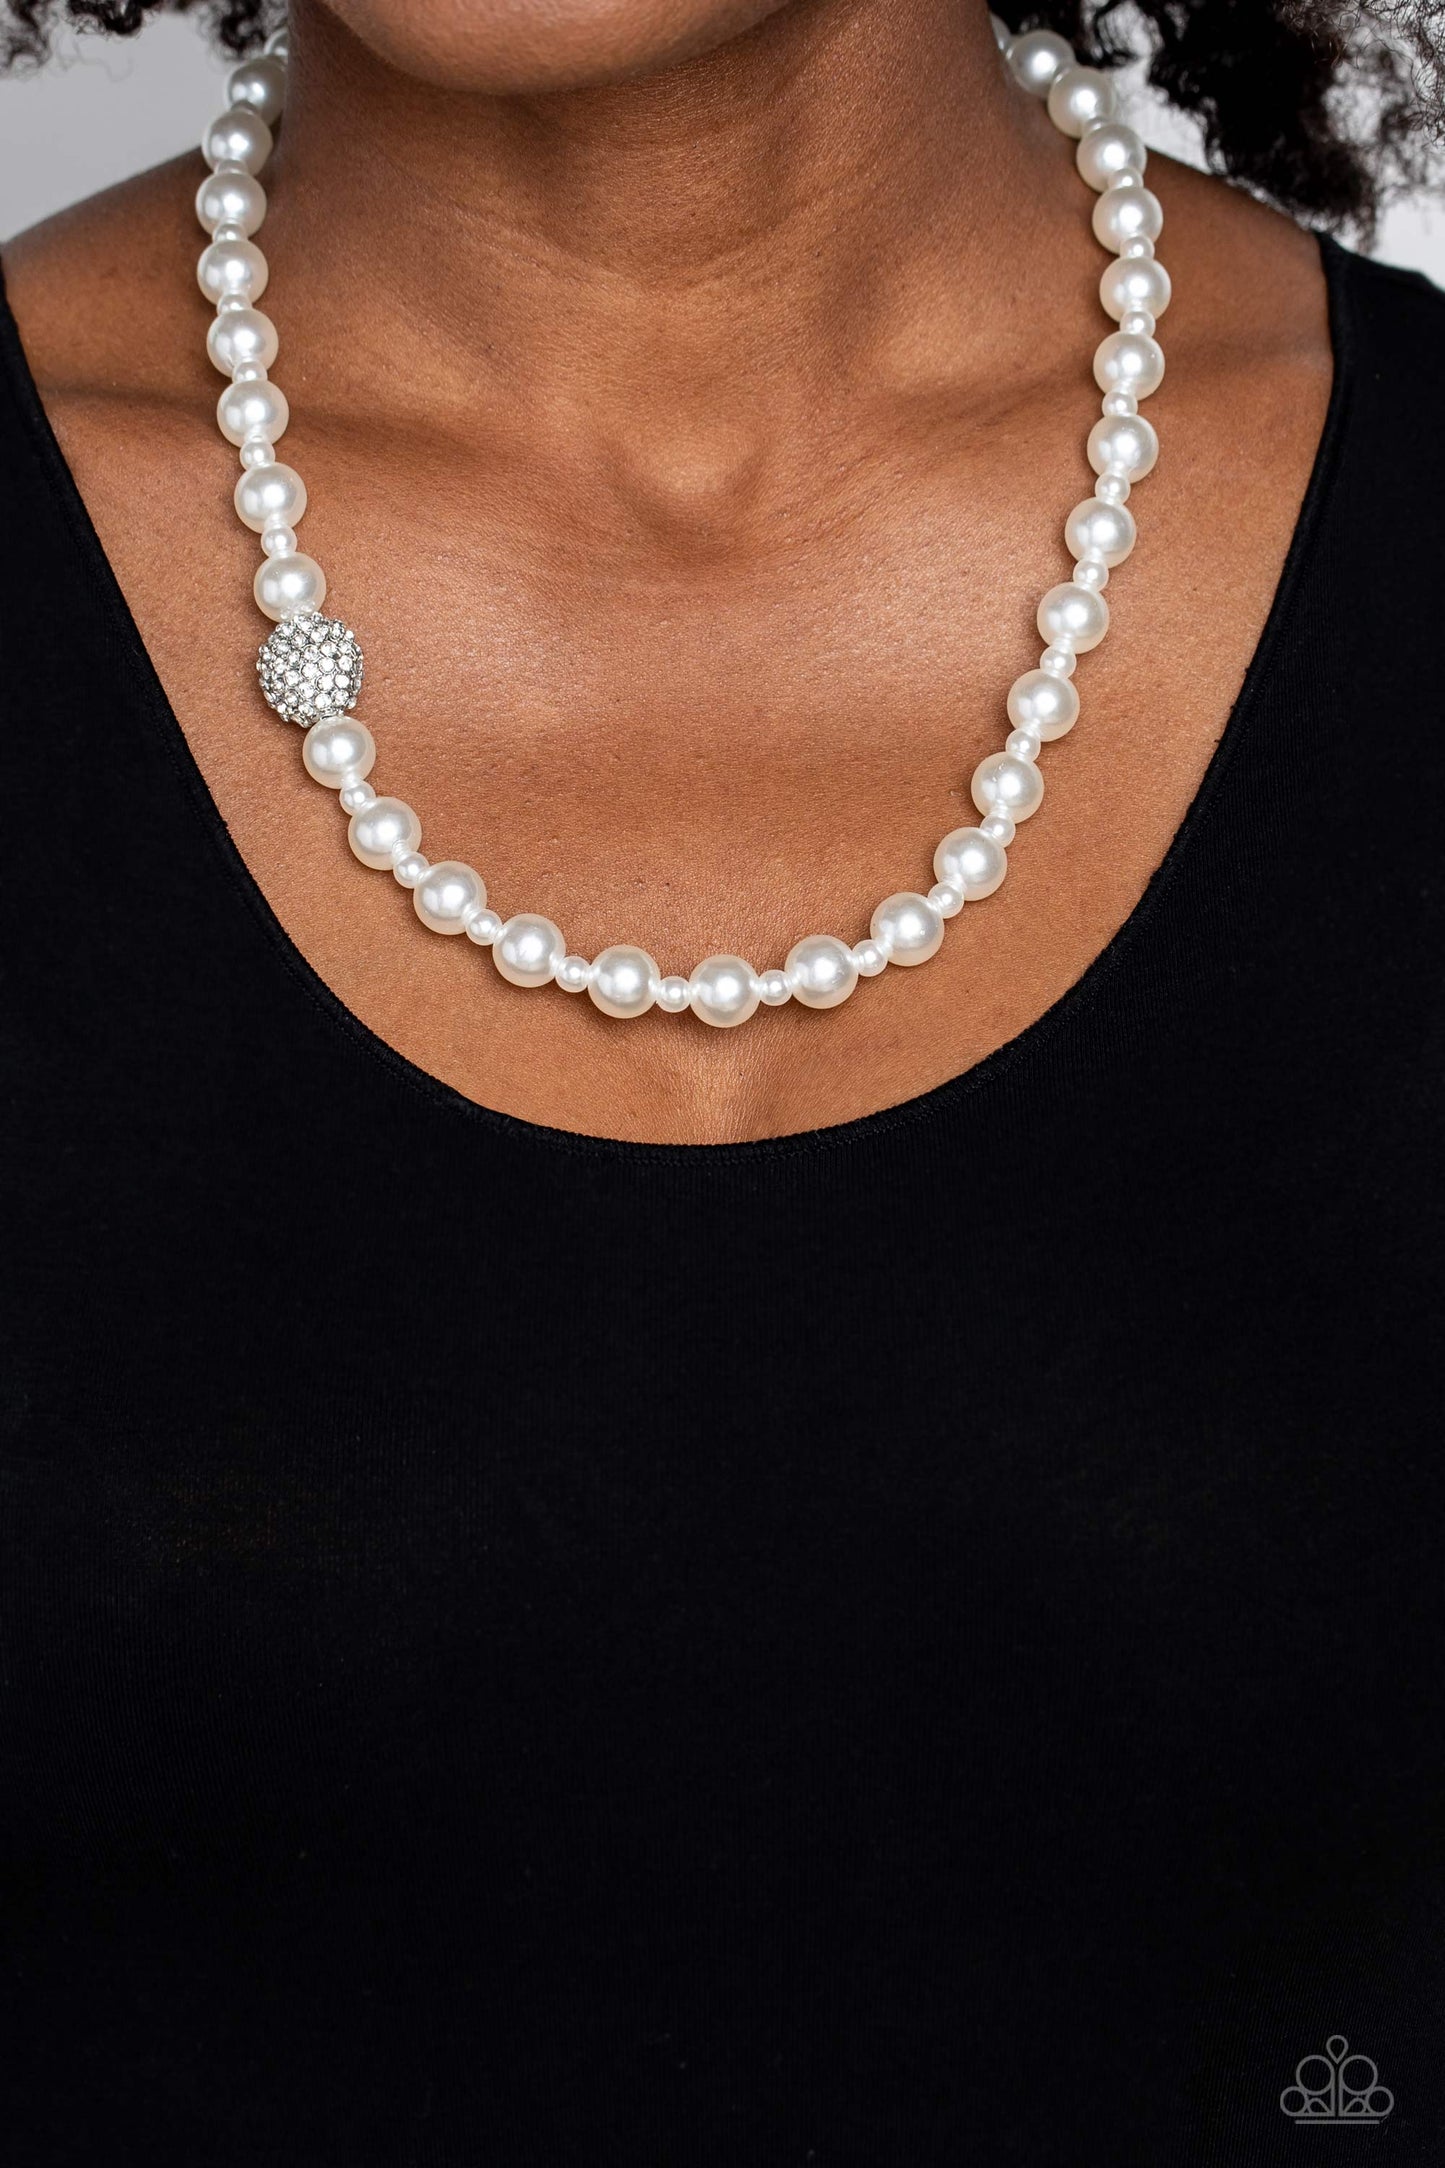 Paparazzi Accessories Countess Chic - White Strung along the entirety of an invisible wire, classic white pearls in varying sizes coalesce down the neckline for a refined finish. Adding to the elegant design, a sparkly white rhinestone-encrusted silver or